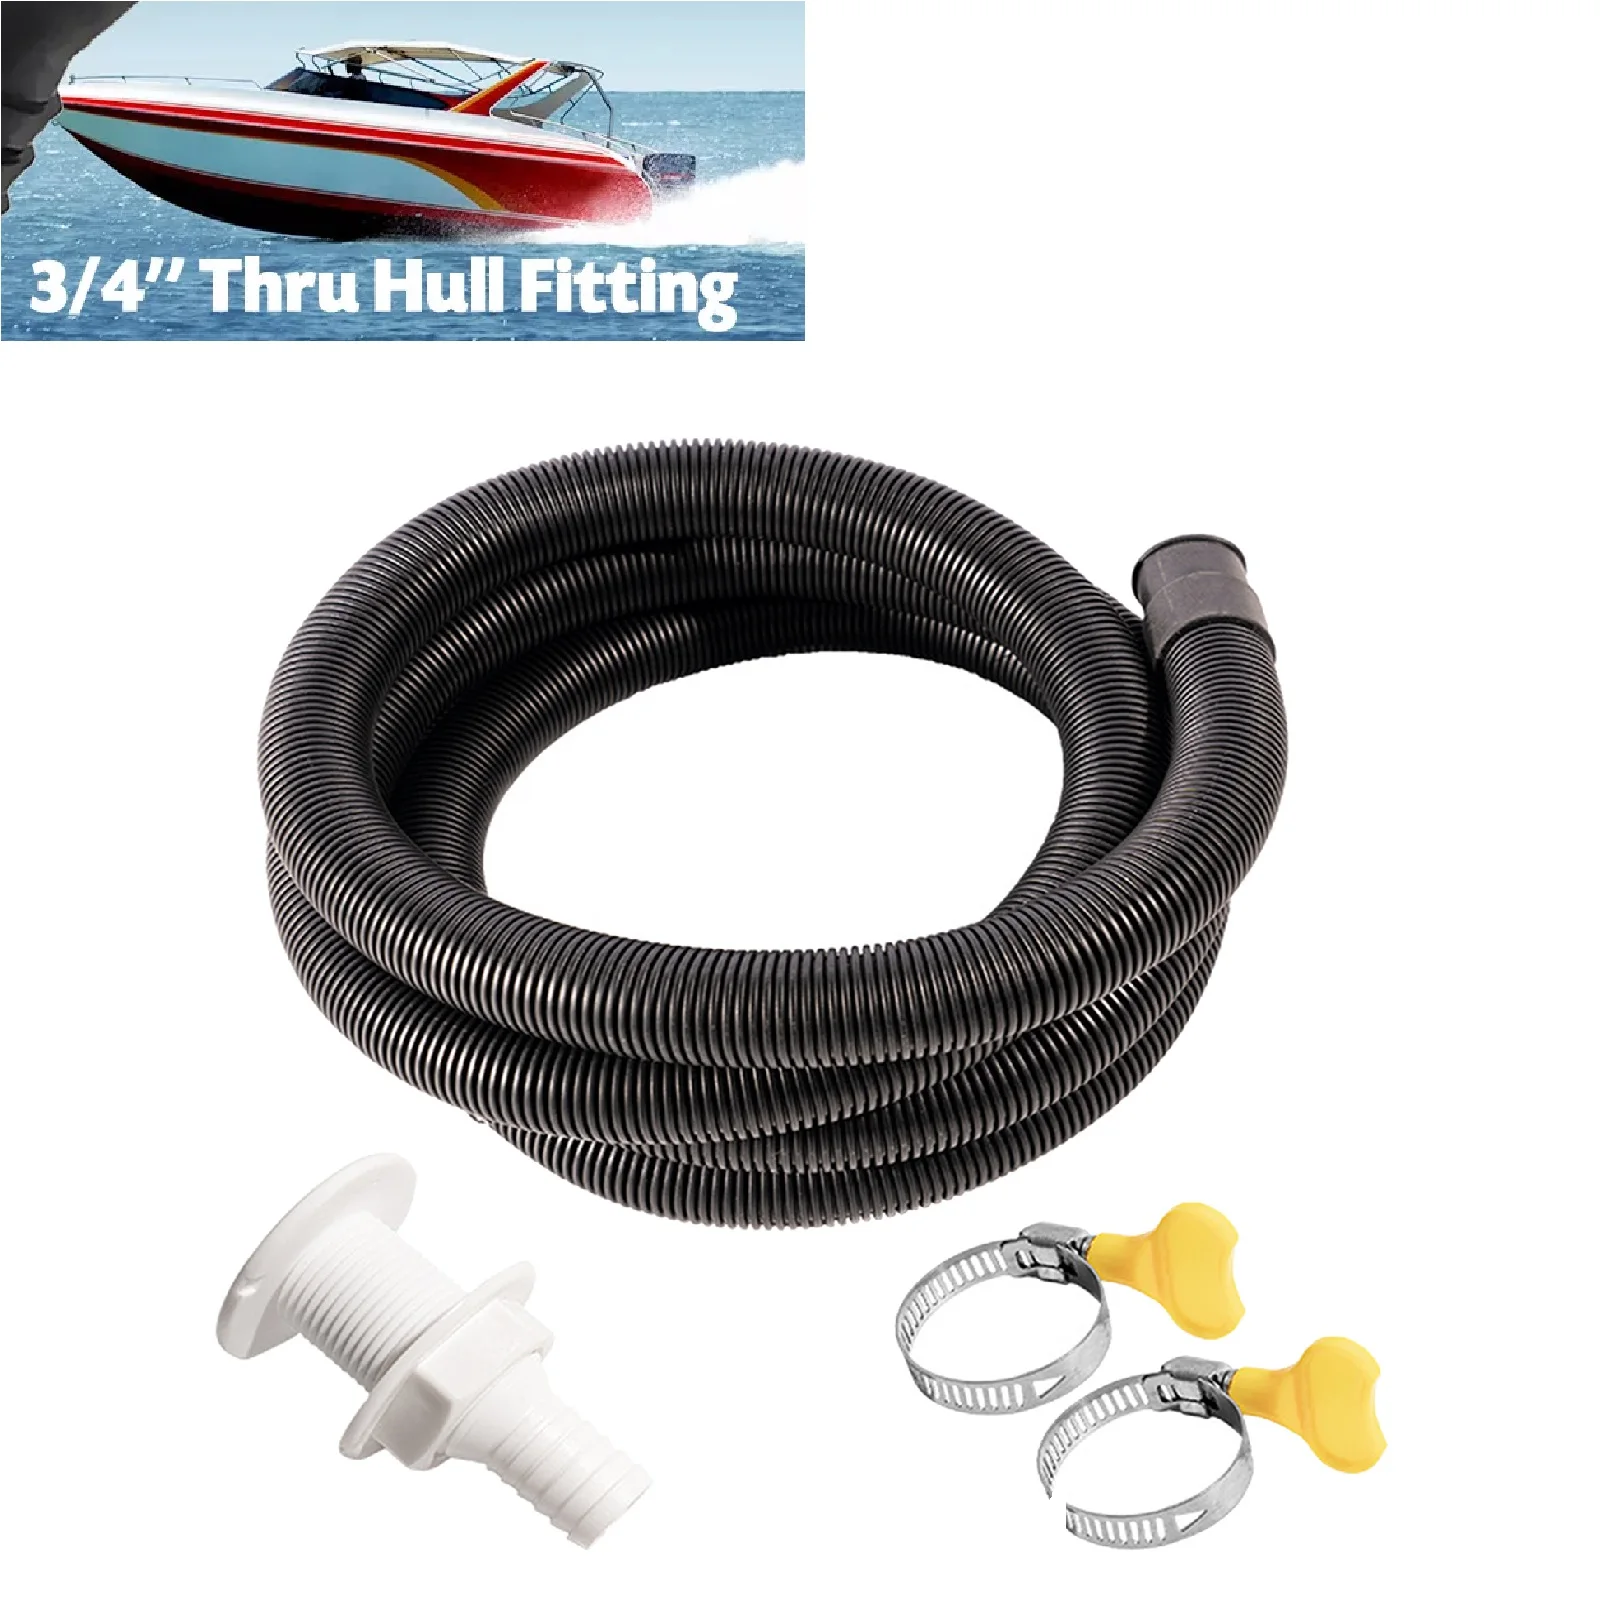 Flexible Bilge Pump Hose Installation Kit 3/4-Inch Diameter 6.6 FT for Boats with 2 Clamps and Thru-Hull Fitting boatman actor pro fishing bait boats gps carp fish dector rc autopilot 16 point 3 5 color sonar china abs hull